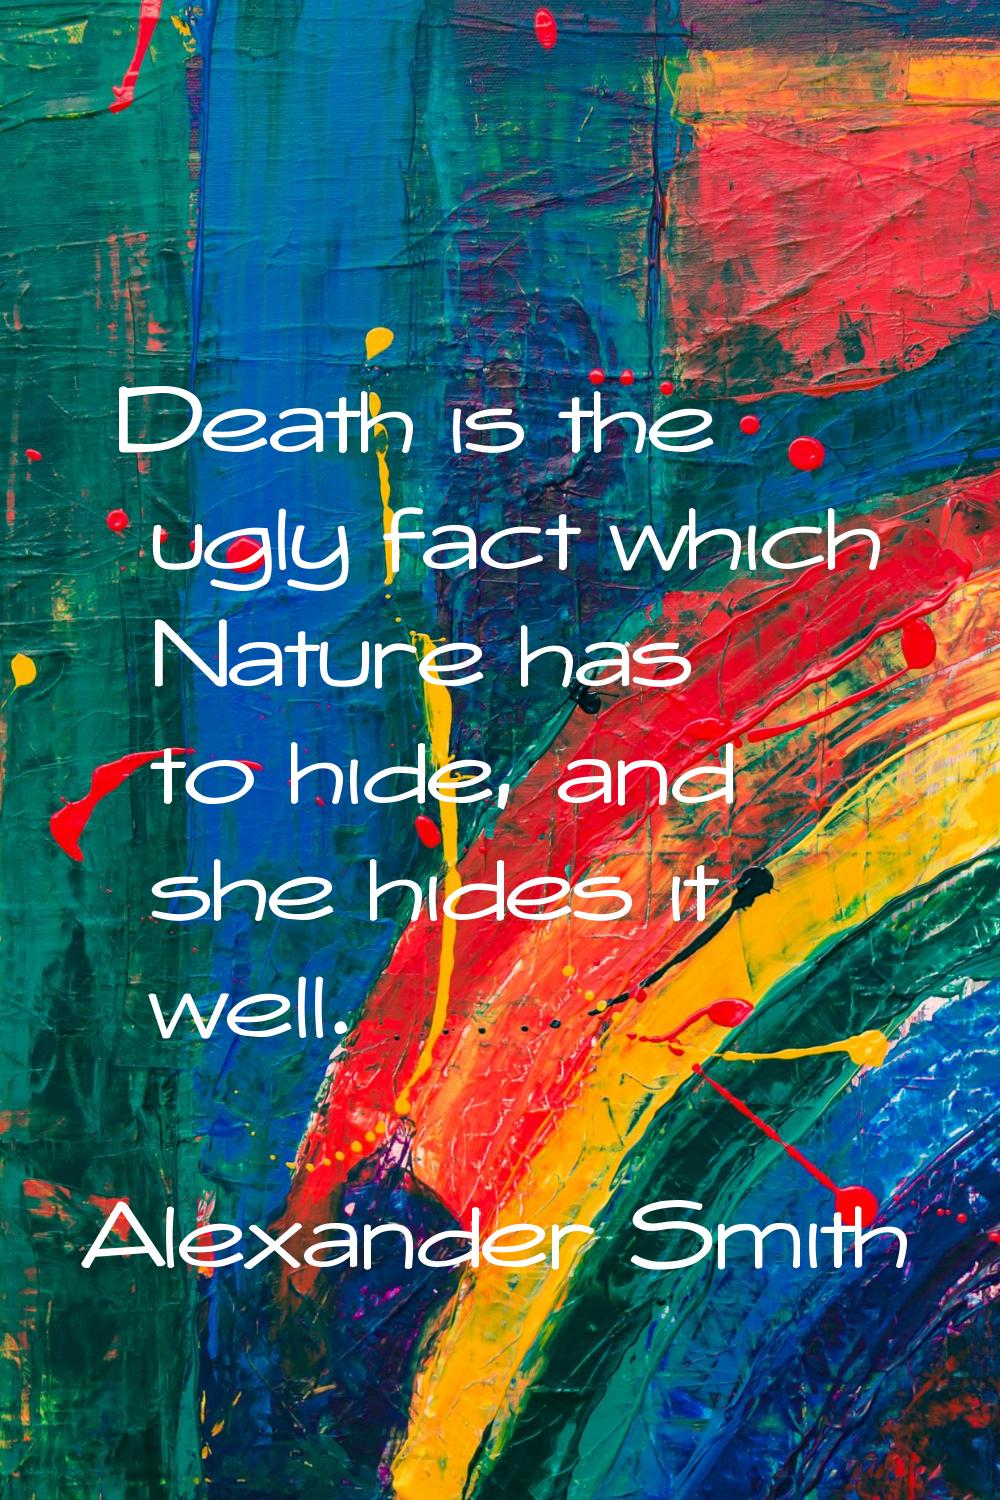 Death is the ugly fact which Nature has to hide, and she hides it well.